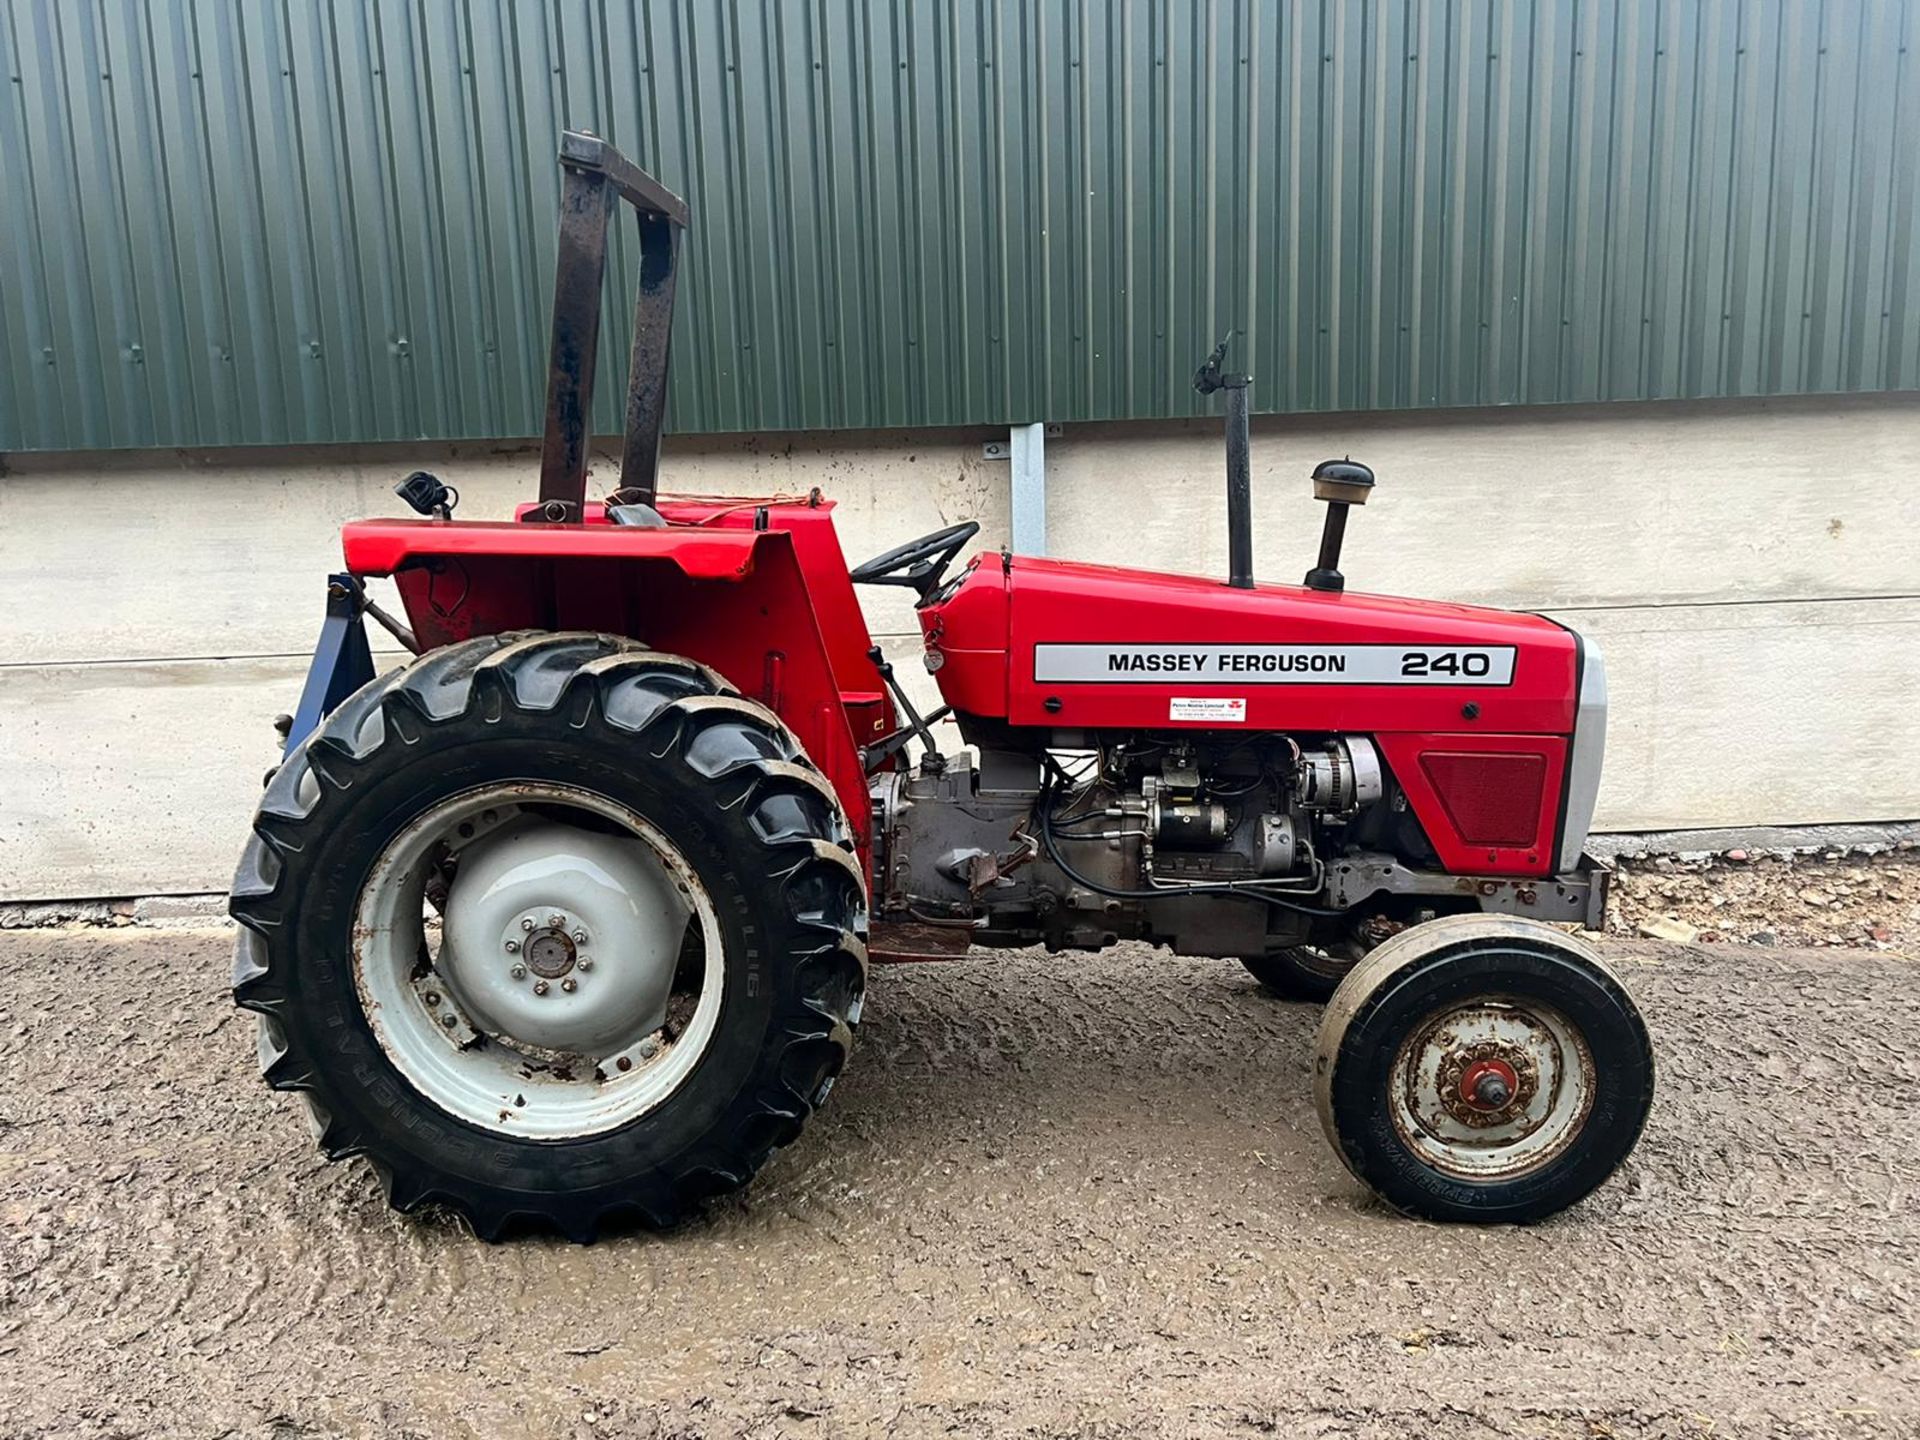 MASSEY FERGUSON 350 52hp 2WD TRACTOR, RUNS DRIVES AND WORKS, SHOWING A LOW 1200 HOURS - Image 8 of 16